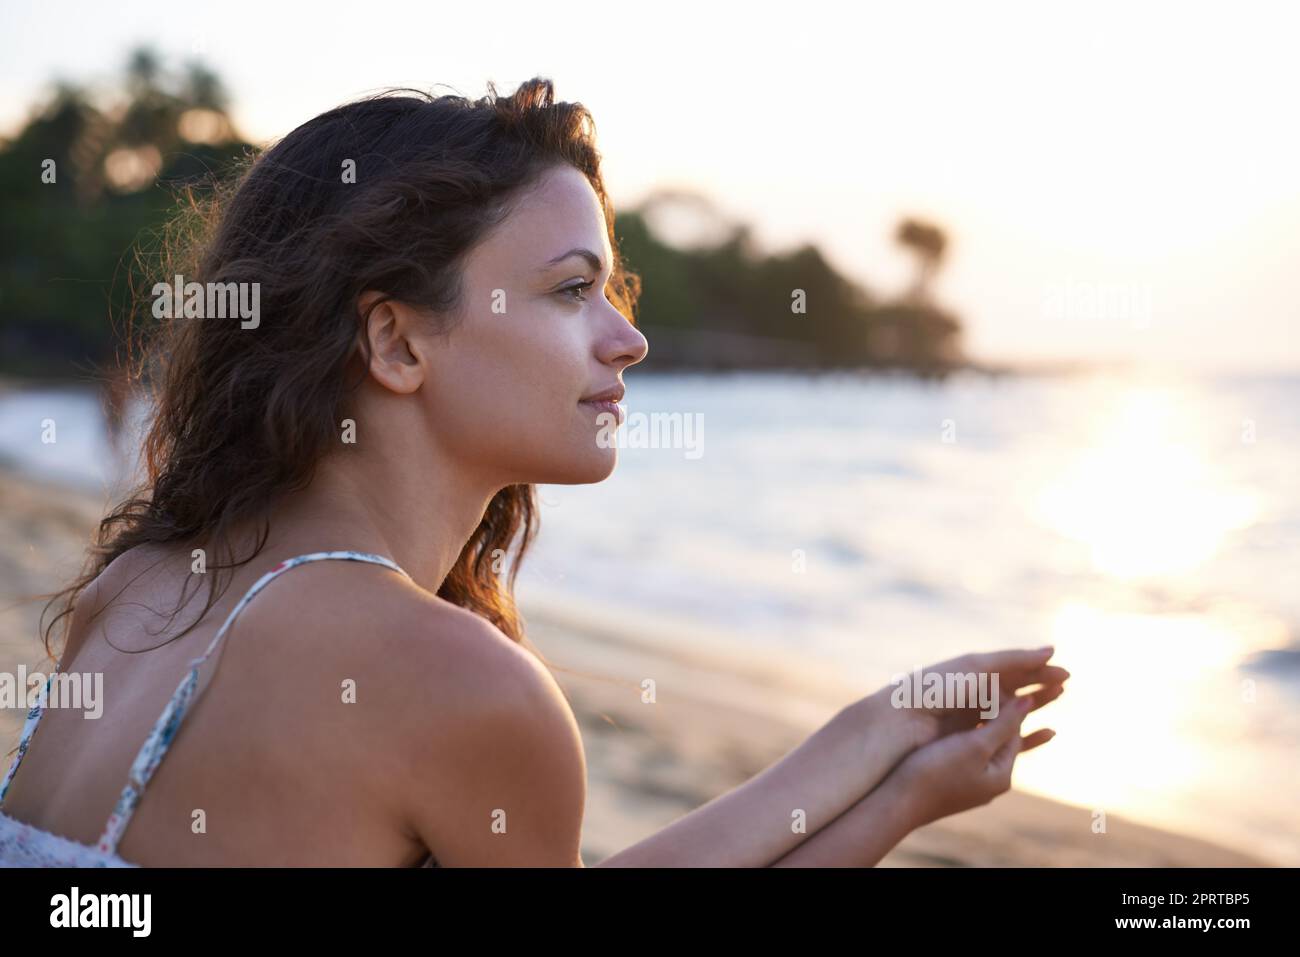 Enjoying the quietness of the beach. a beautiful young woman on the beach. Stock Photo